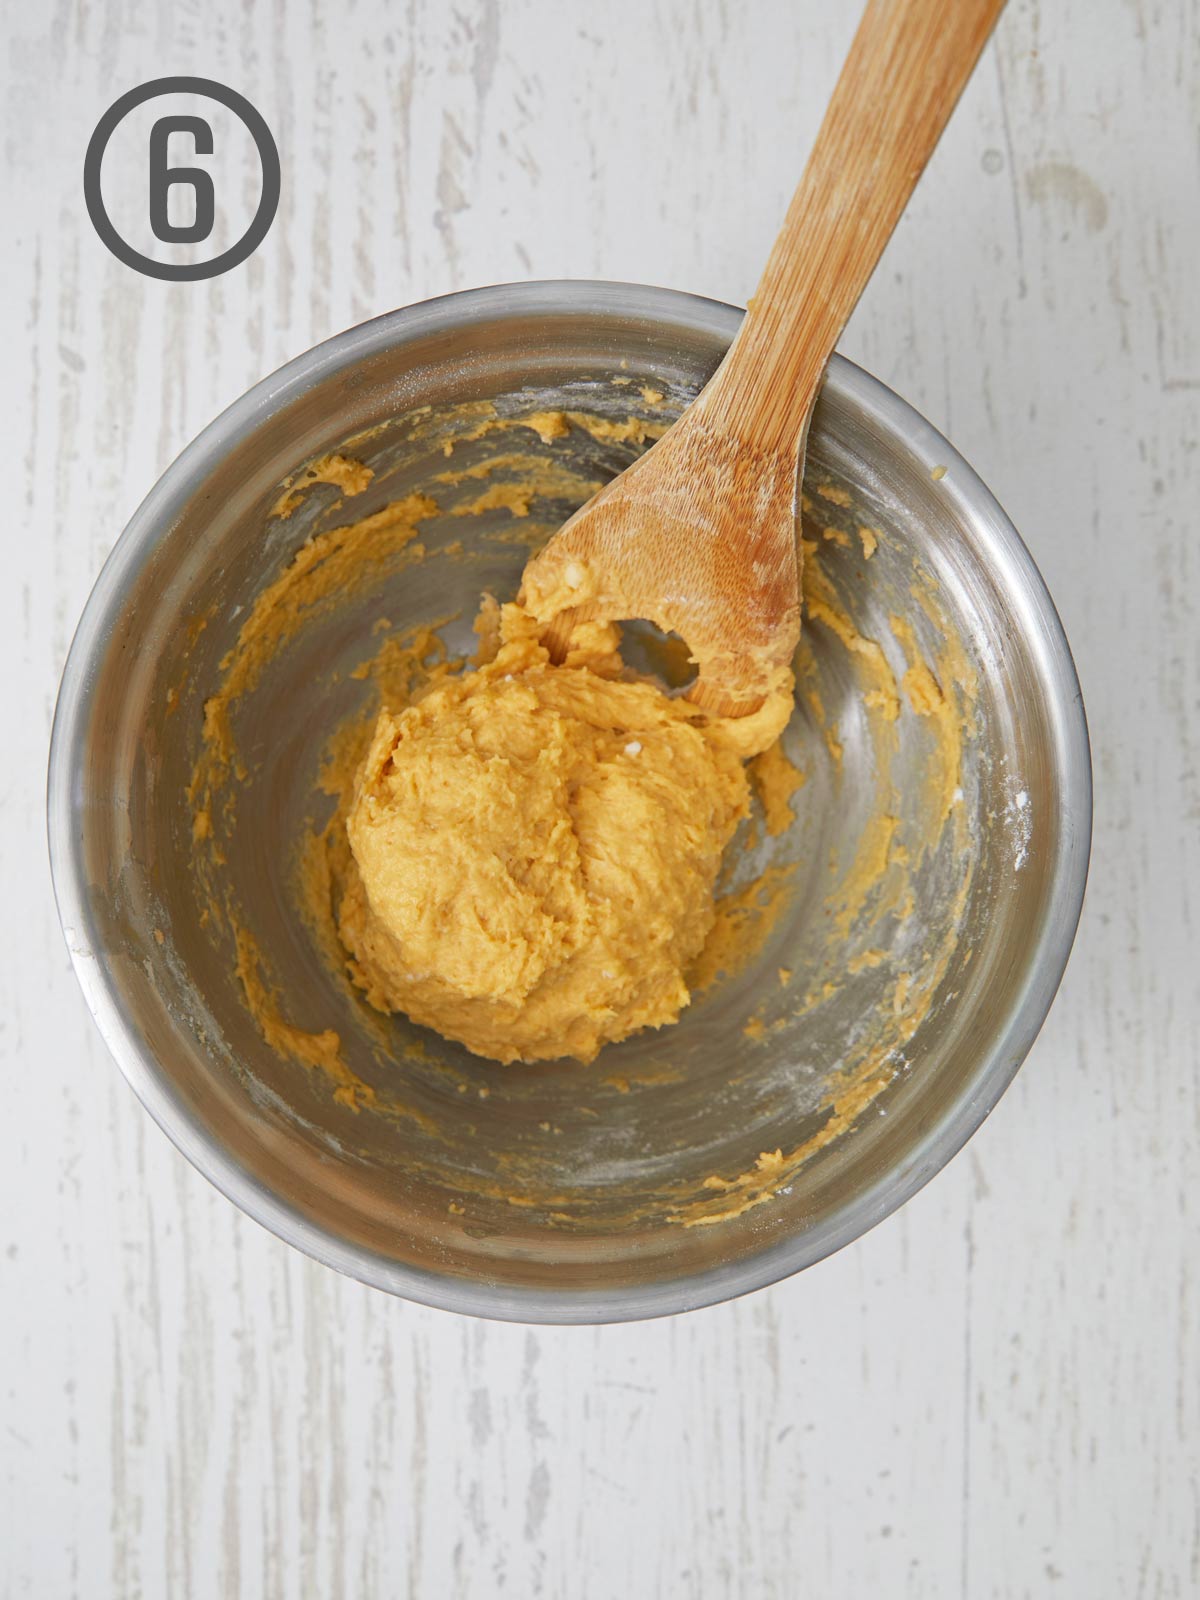 A wooden spoon is being used to mix the dough for pumpkin dinner rolls in a bowl.